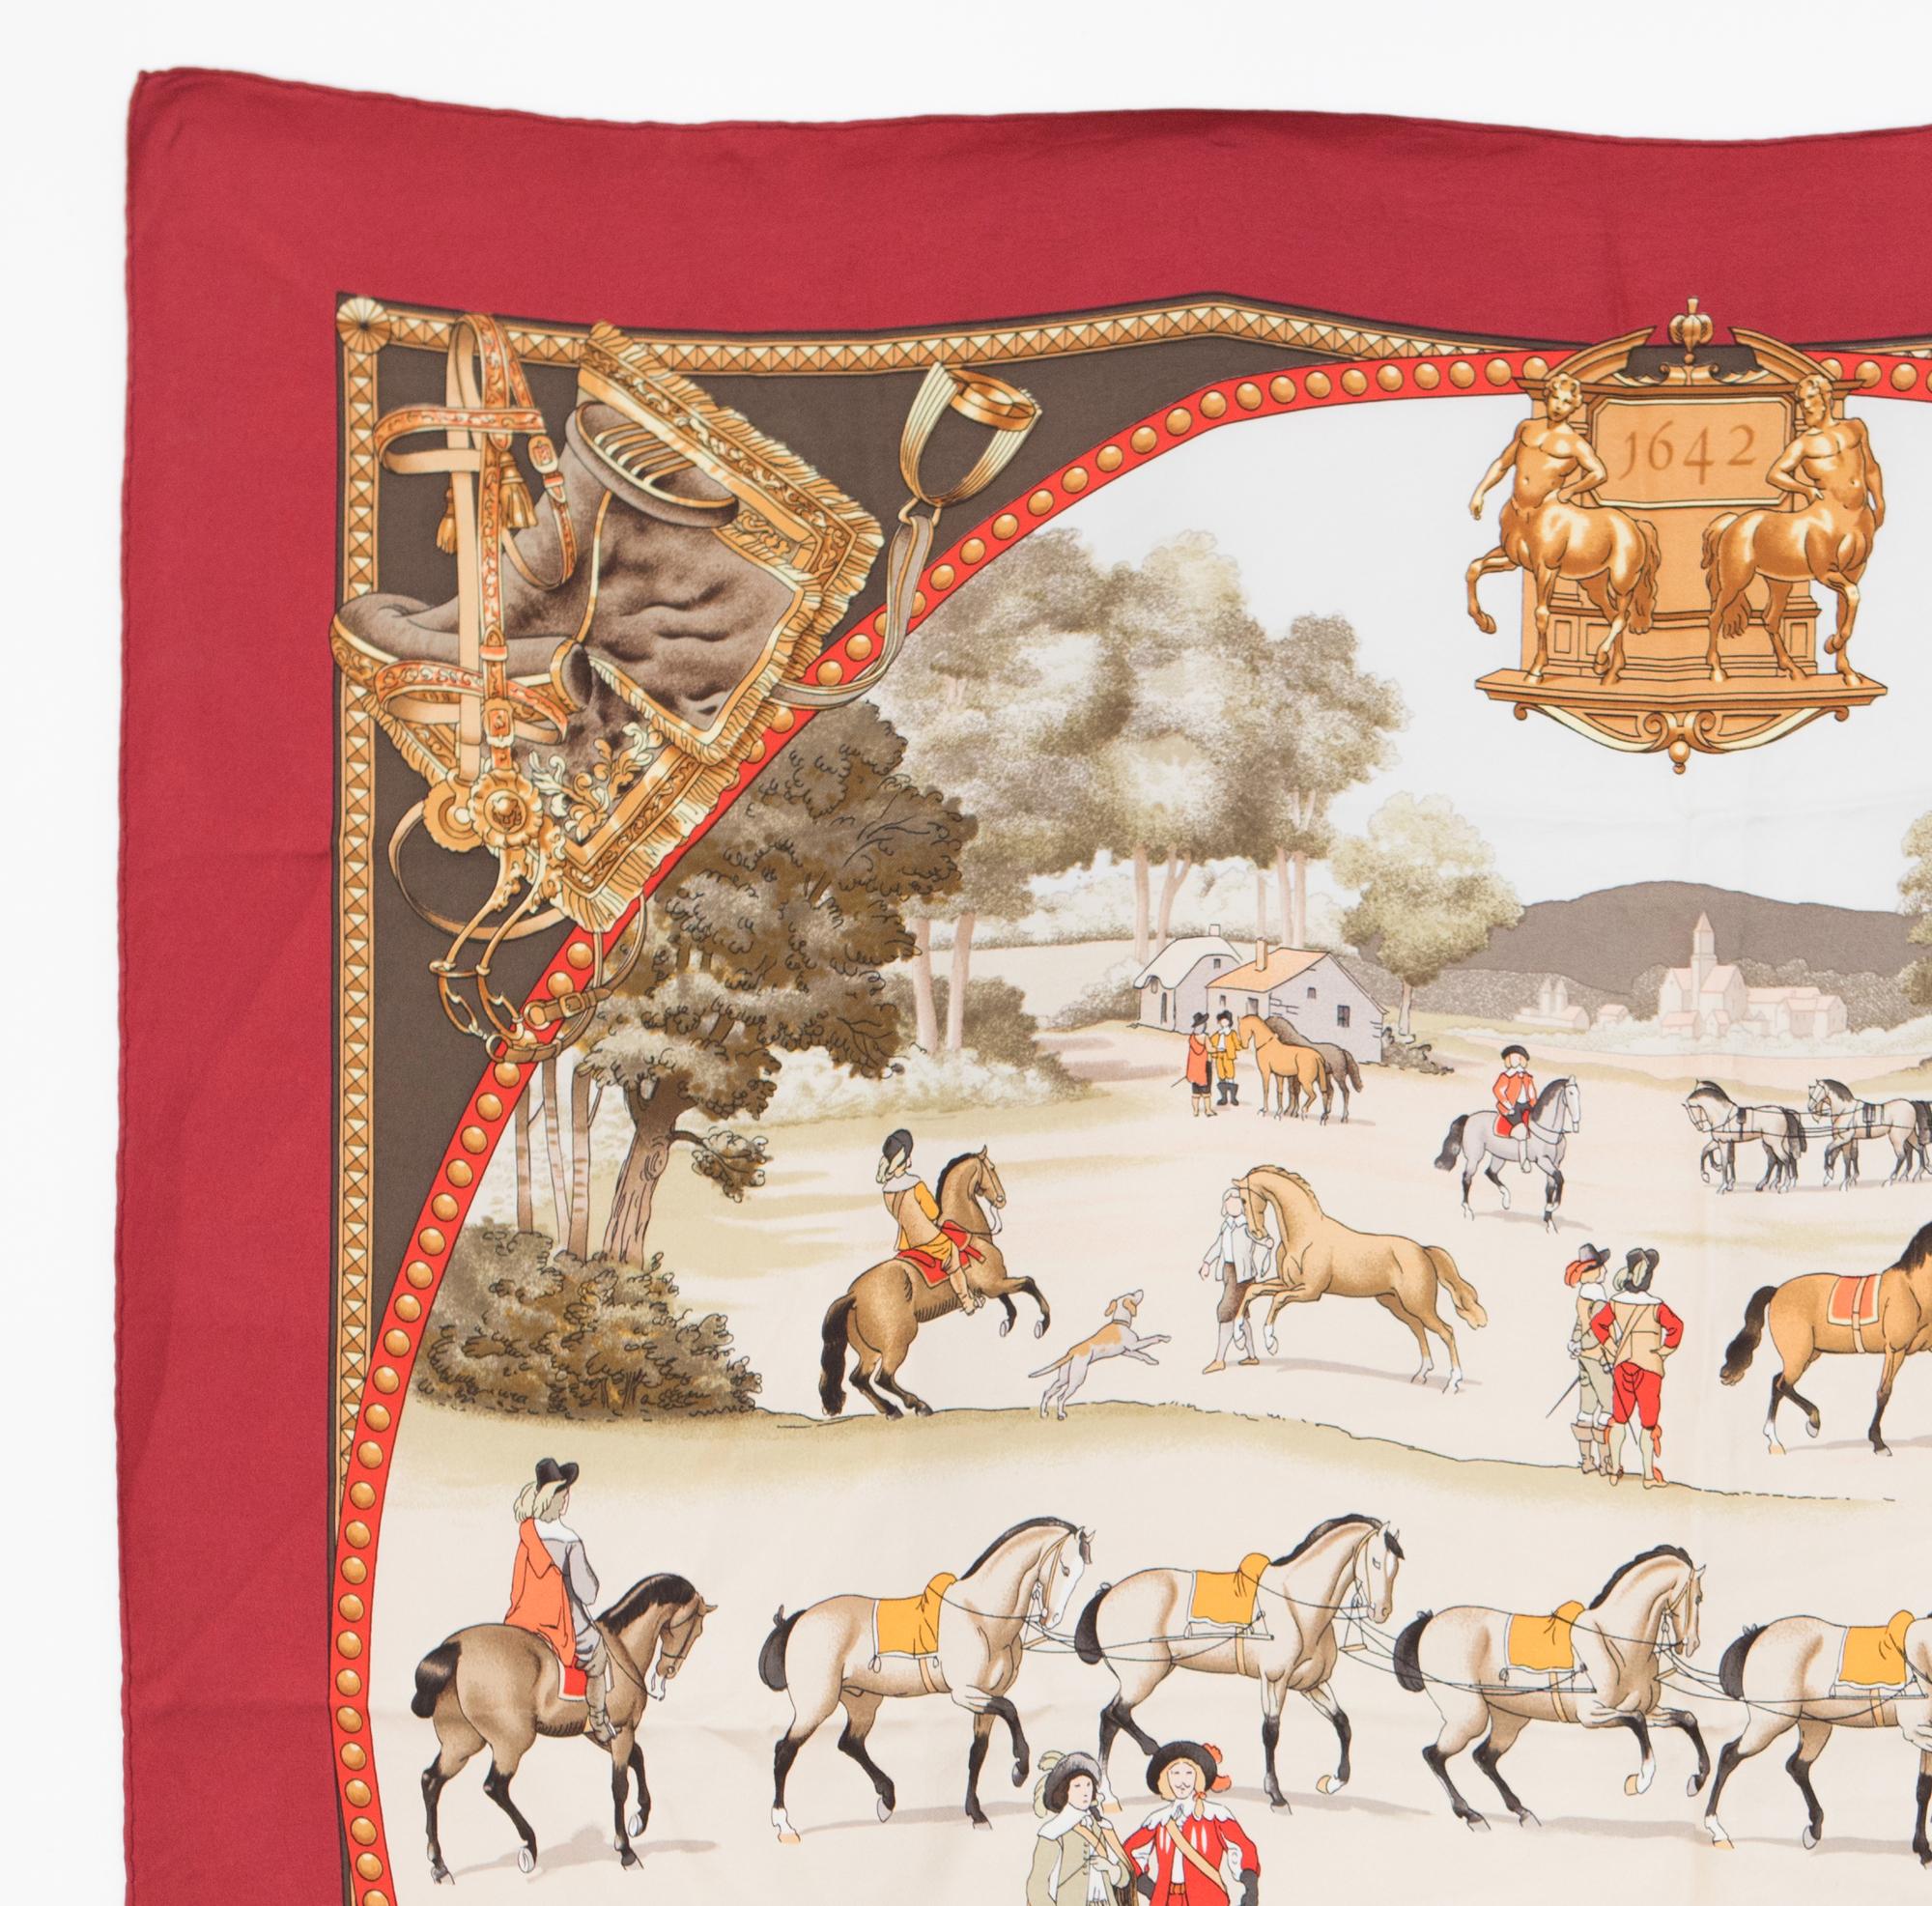 Red Hermes silk scarf  Presentation de Chevaux by Ledoux featuring a red border.  
In good vintage condition. Made in France.
35 in. (89 cm) X 35 in. (89 cm)
We guarantee you will receive this  iconic item as described and showed on photos.
(please